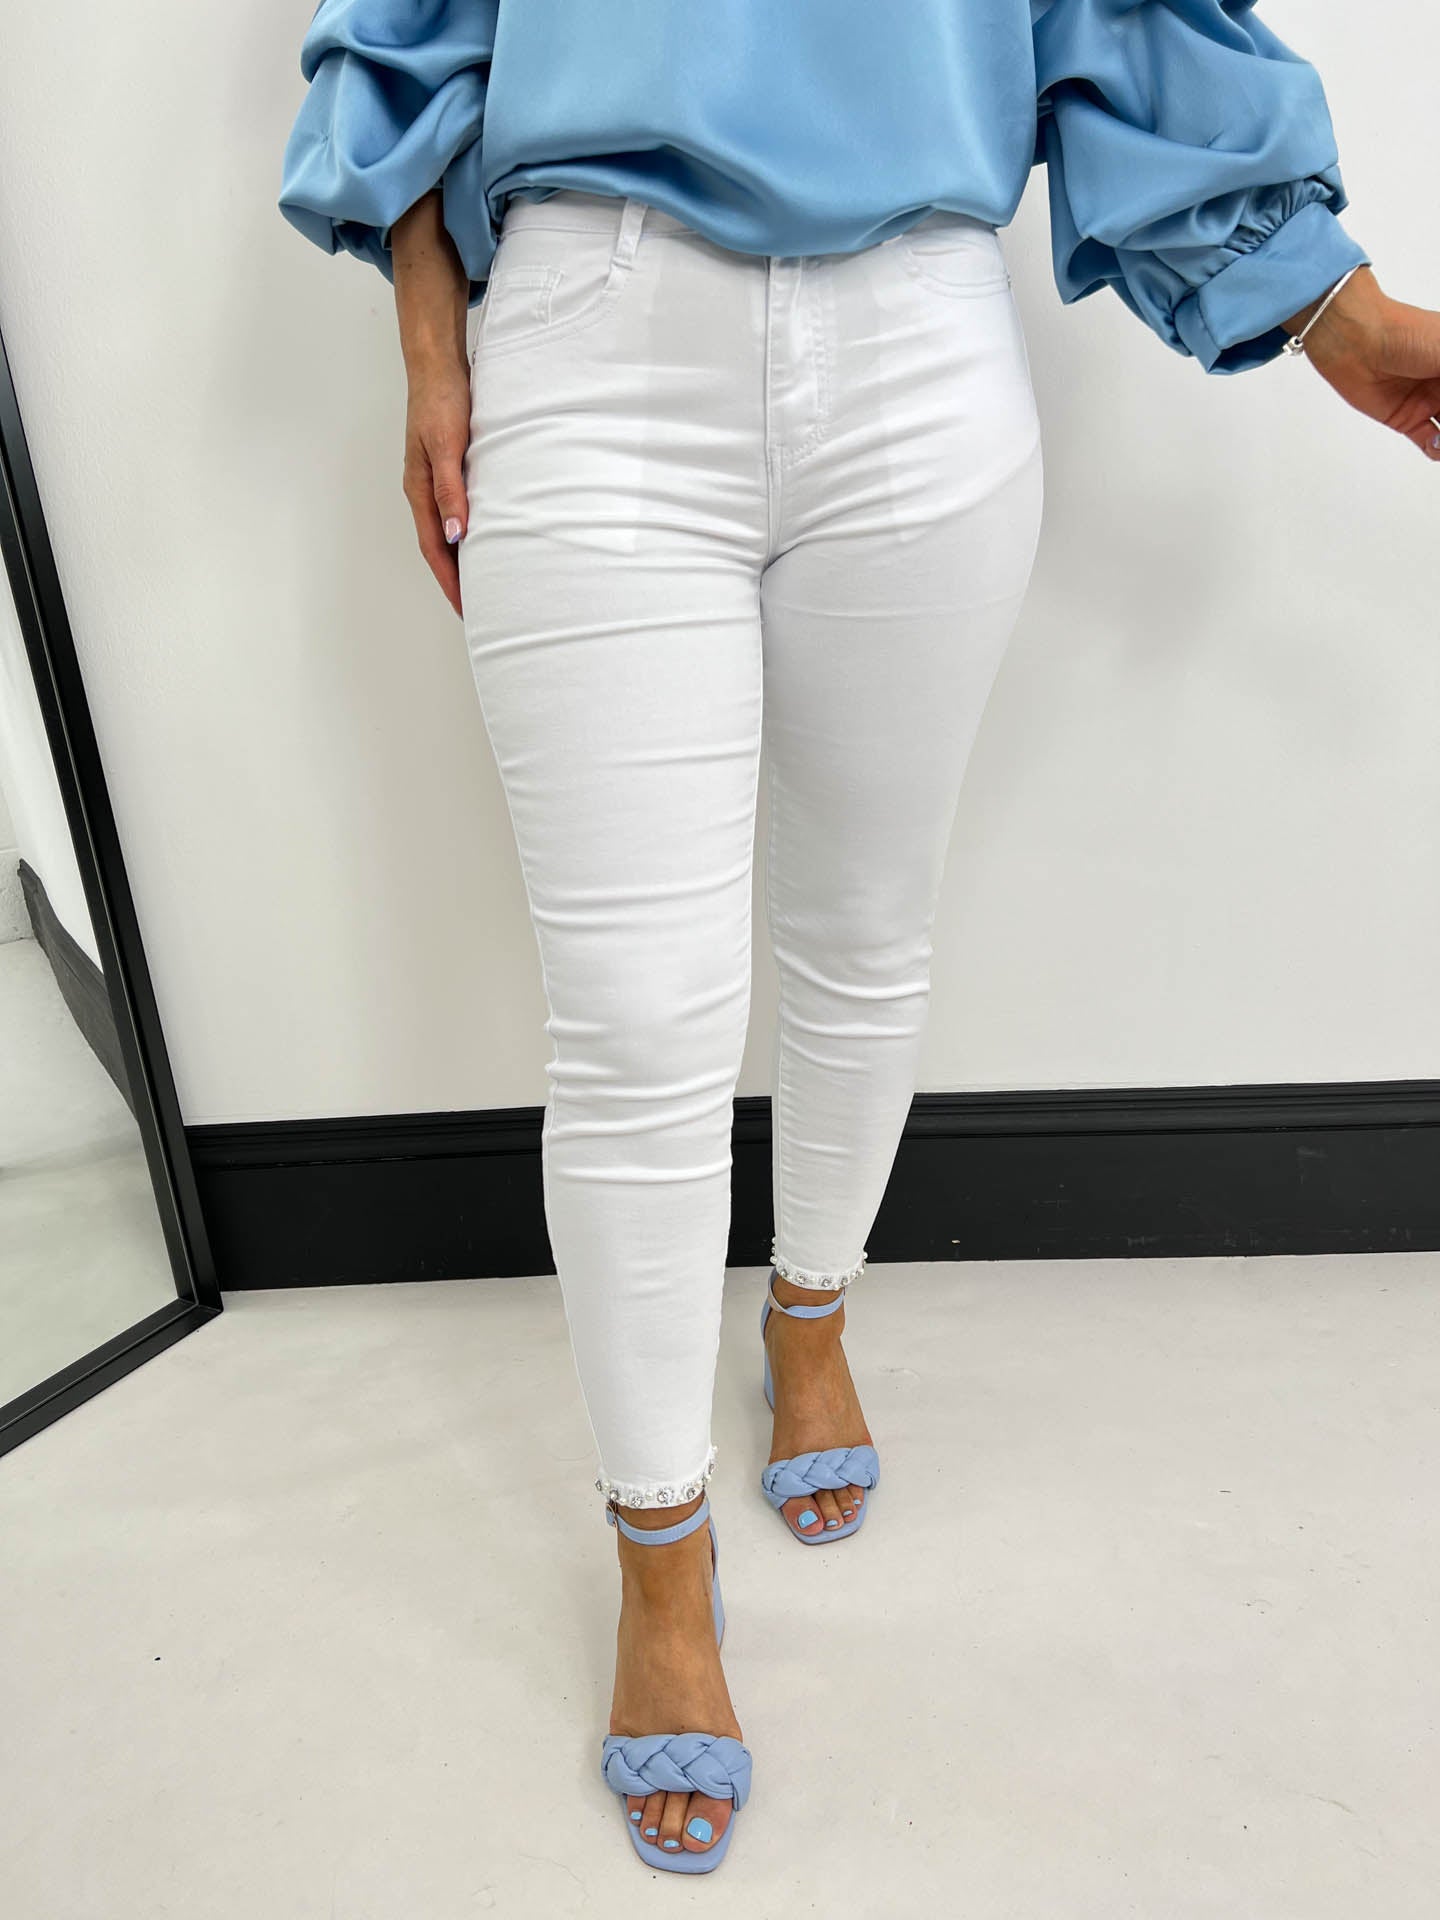 The Ashleigh - Embellished Skinny Jeans